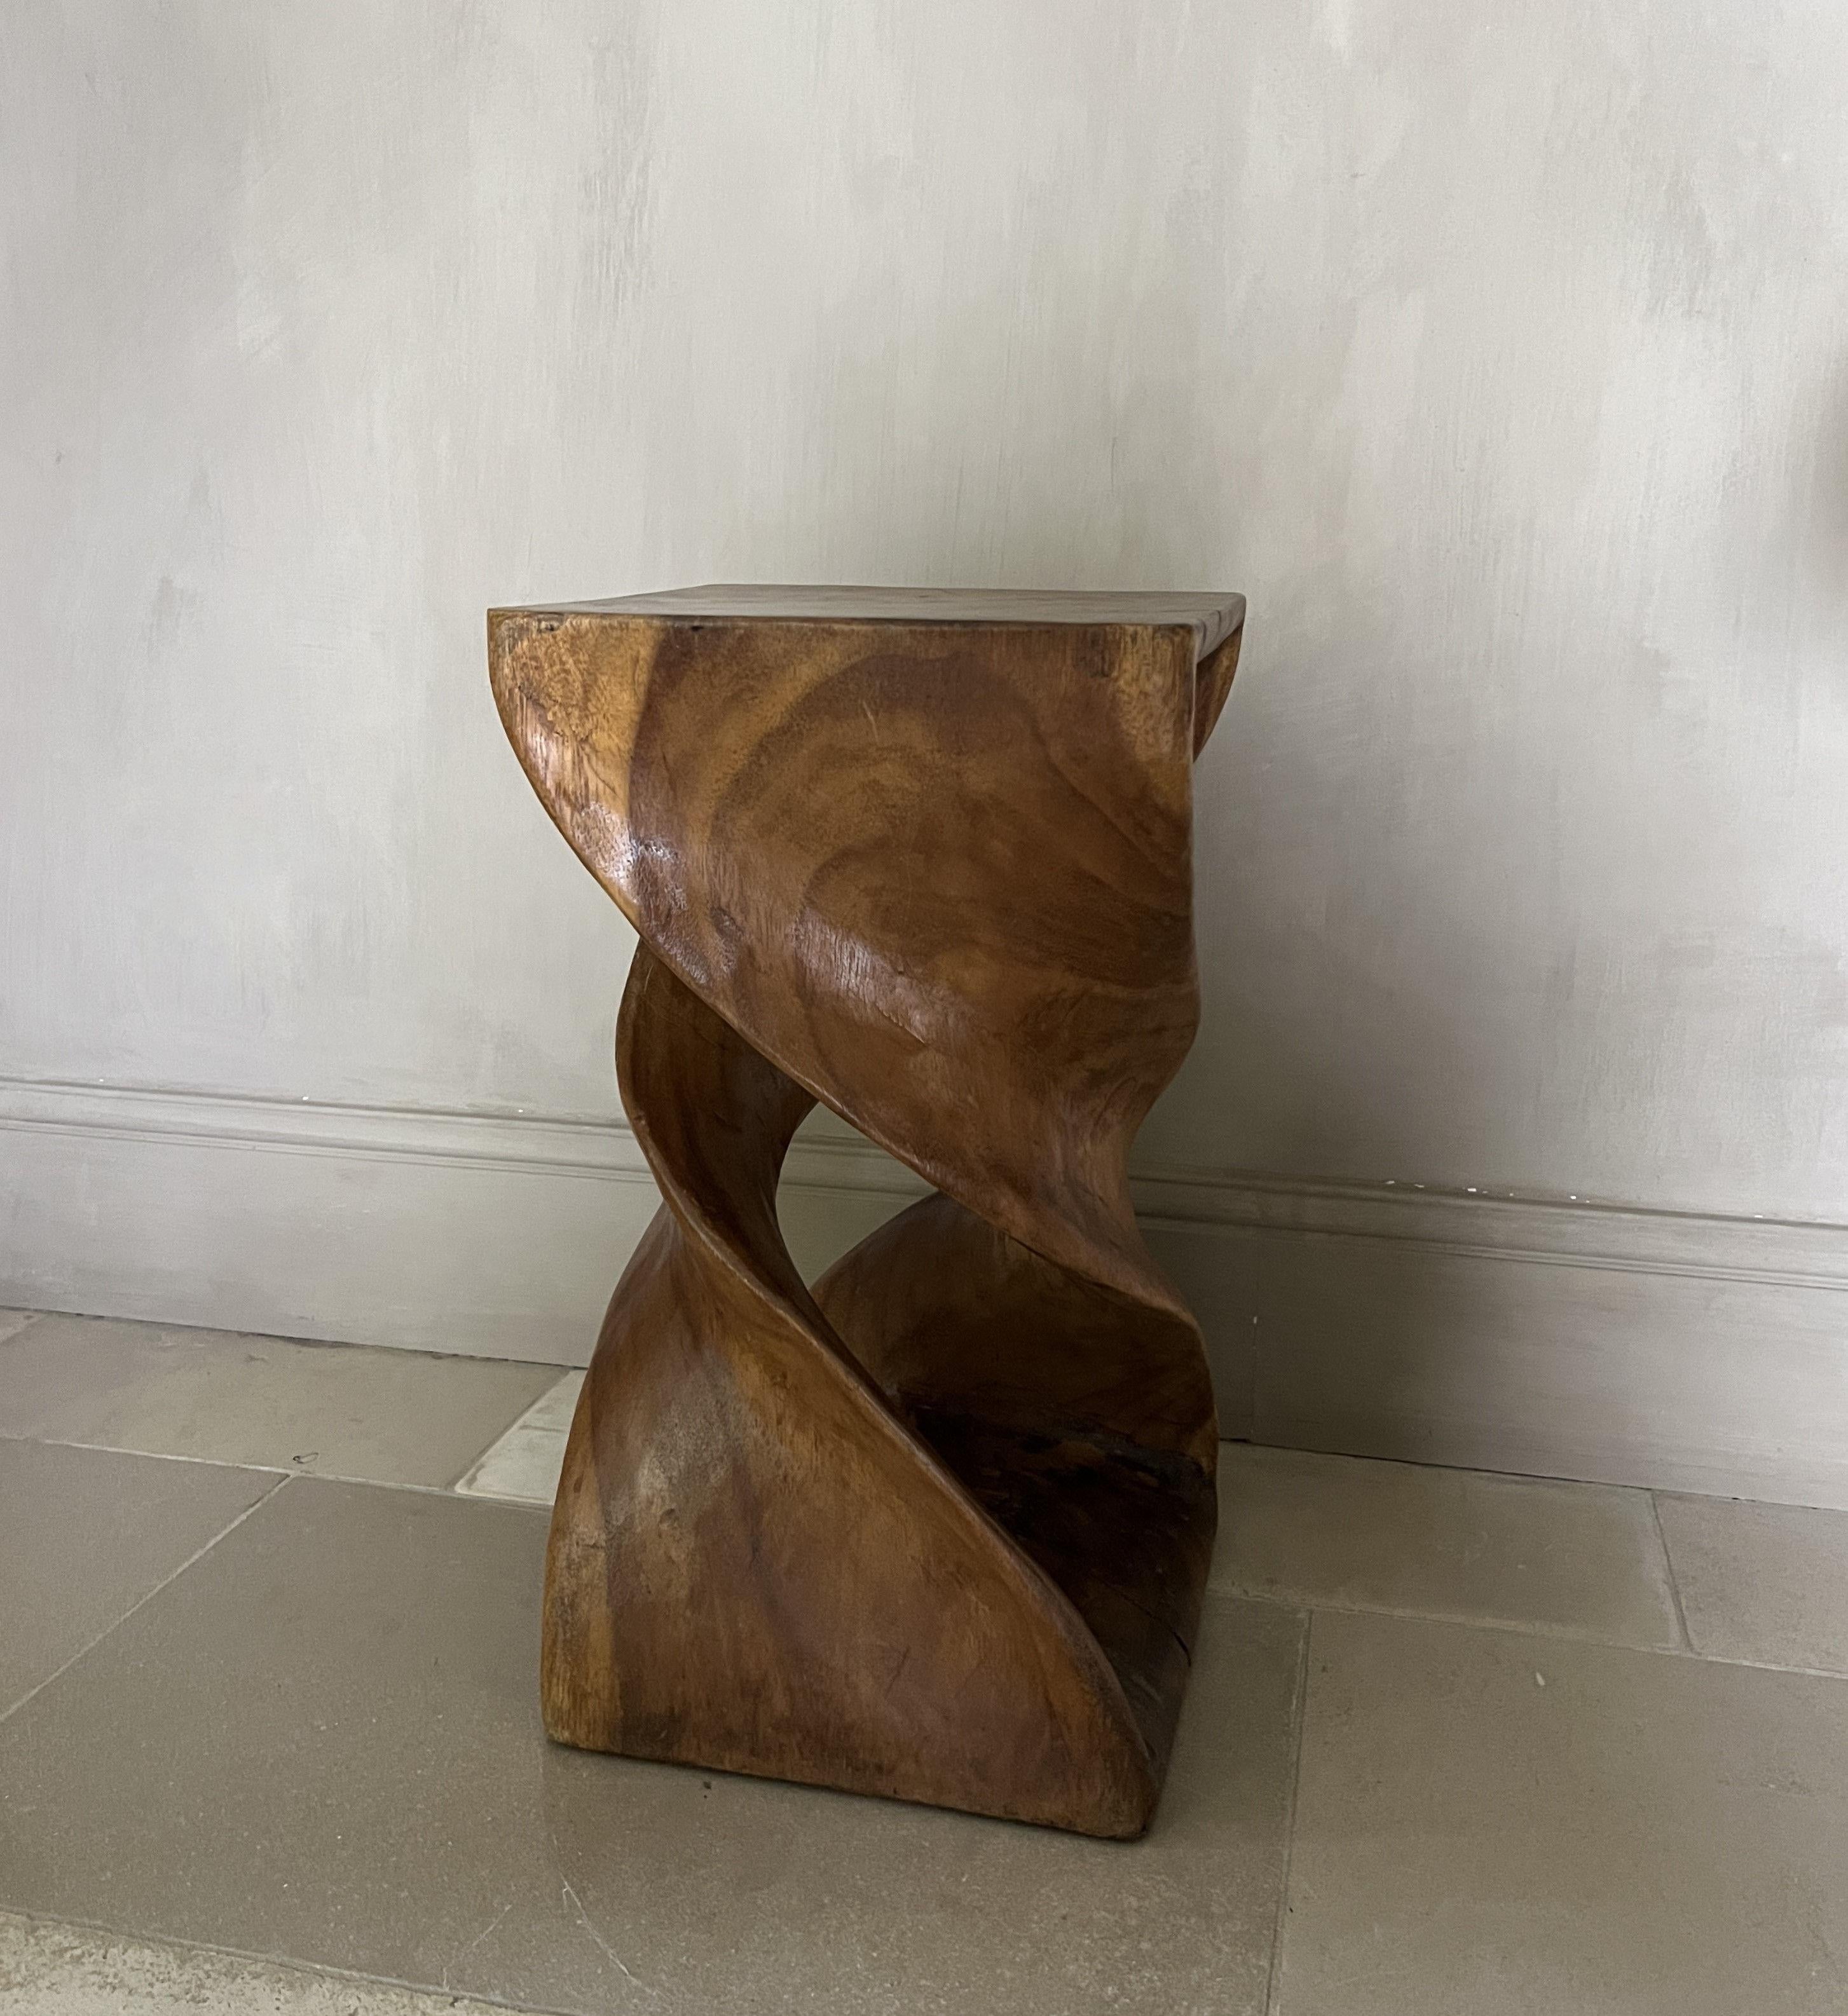 A stool or sidetable made from one single block of massive sexotic wood. Verry much reminiscent of midcentury modernist desigerers like Brazilian architect Zanine Caldas. The handsculpted ellipse shape gives this stool an impression of lightness and